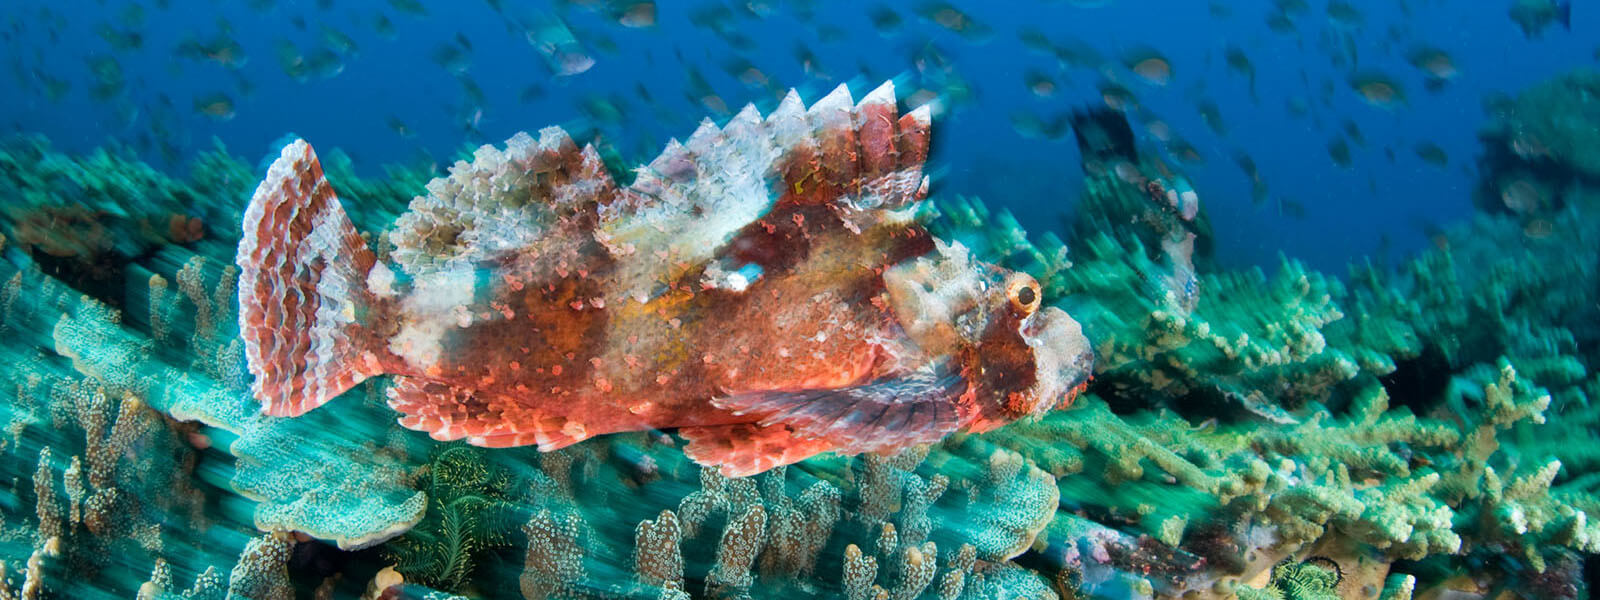 Scorpionfish photographed while snorkeling in Indonesia